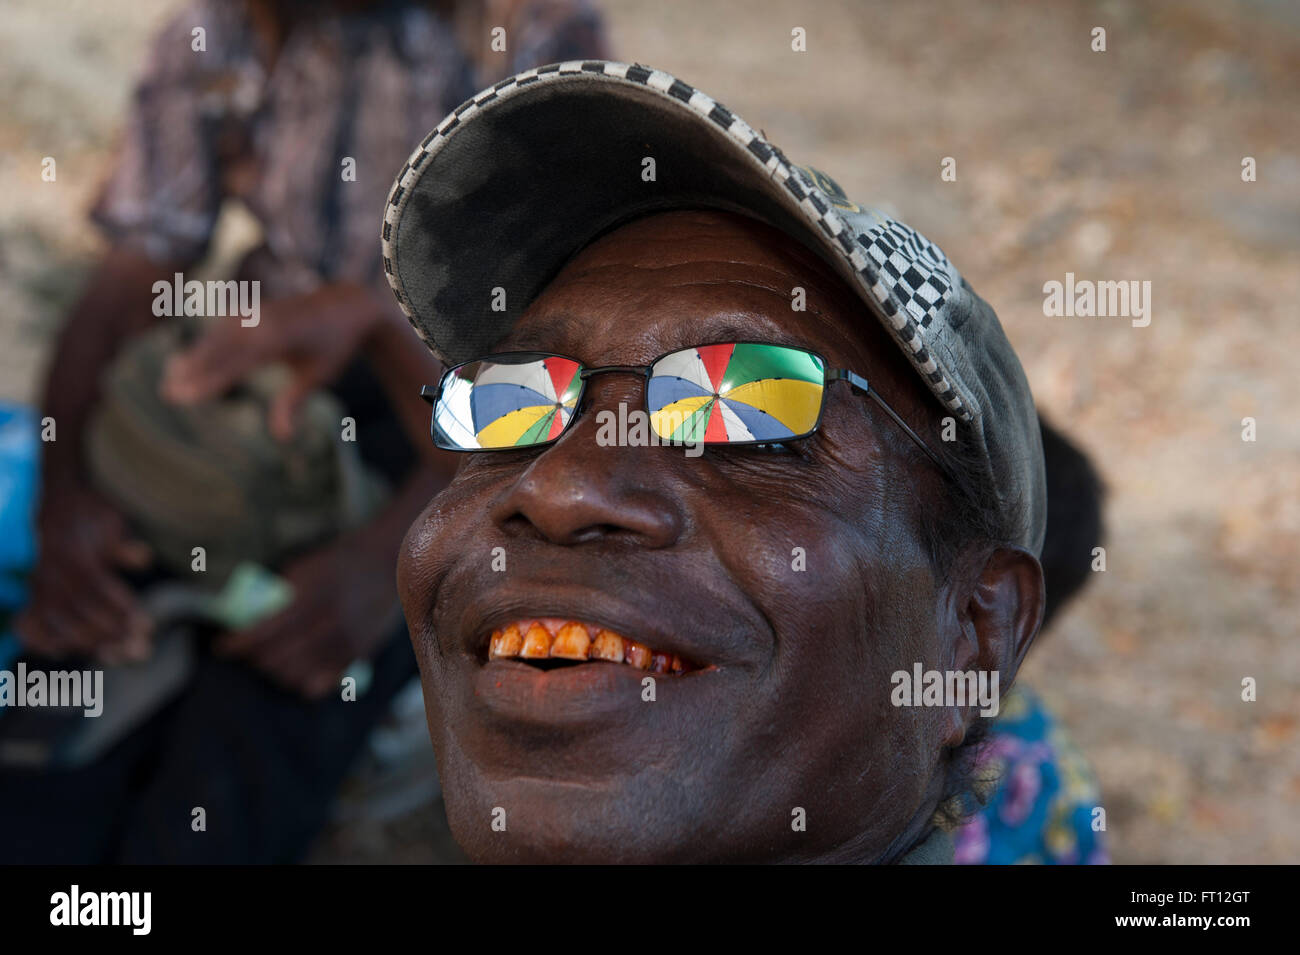 Reflection of a colourful umbrella in the sunglasses of a man with red teeth from chewing betelnut, Wewak, East Sepik Province, Papua New Guinea, South Pacific Stock Photo